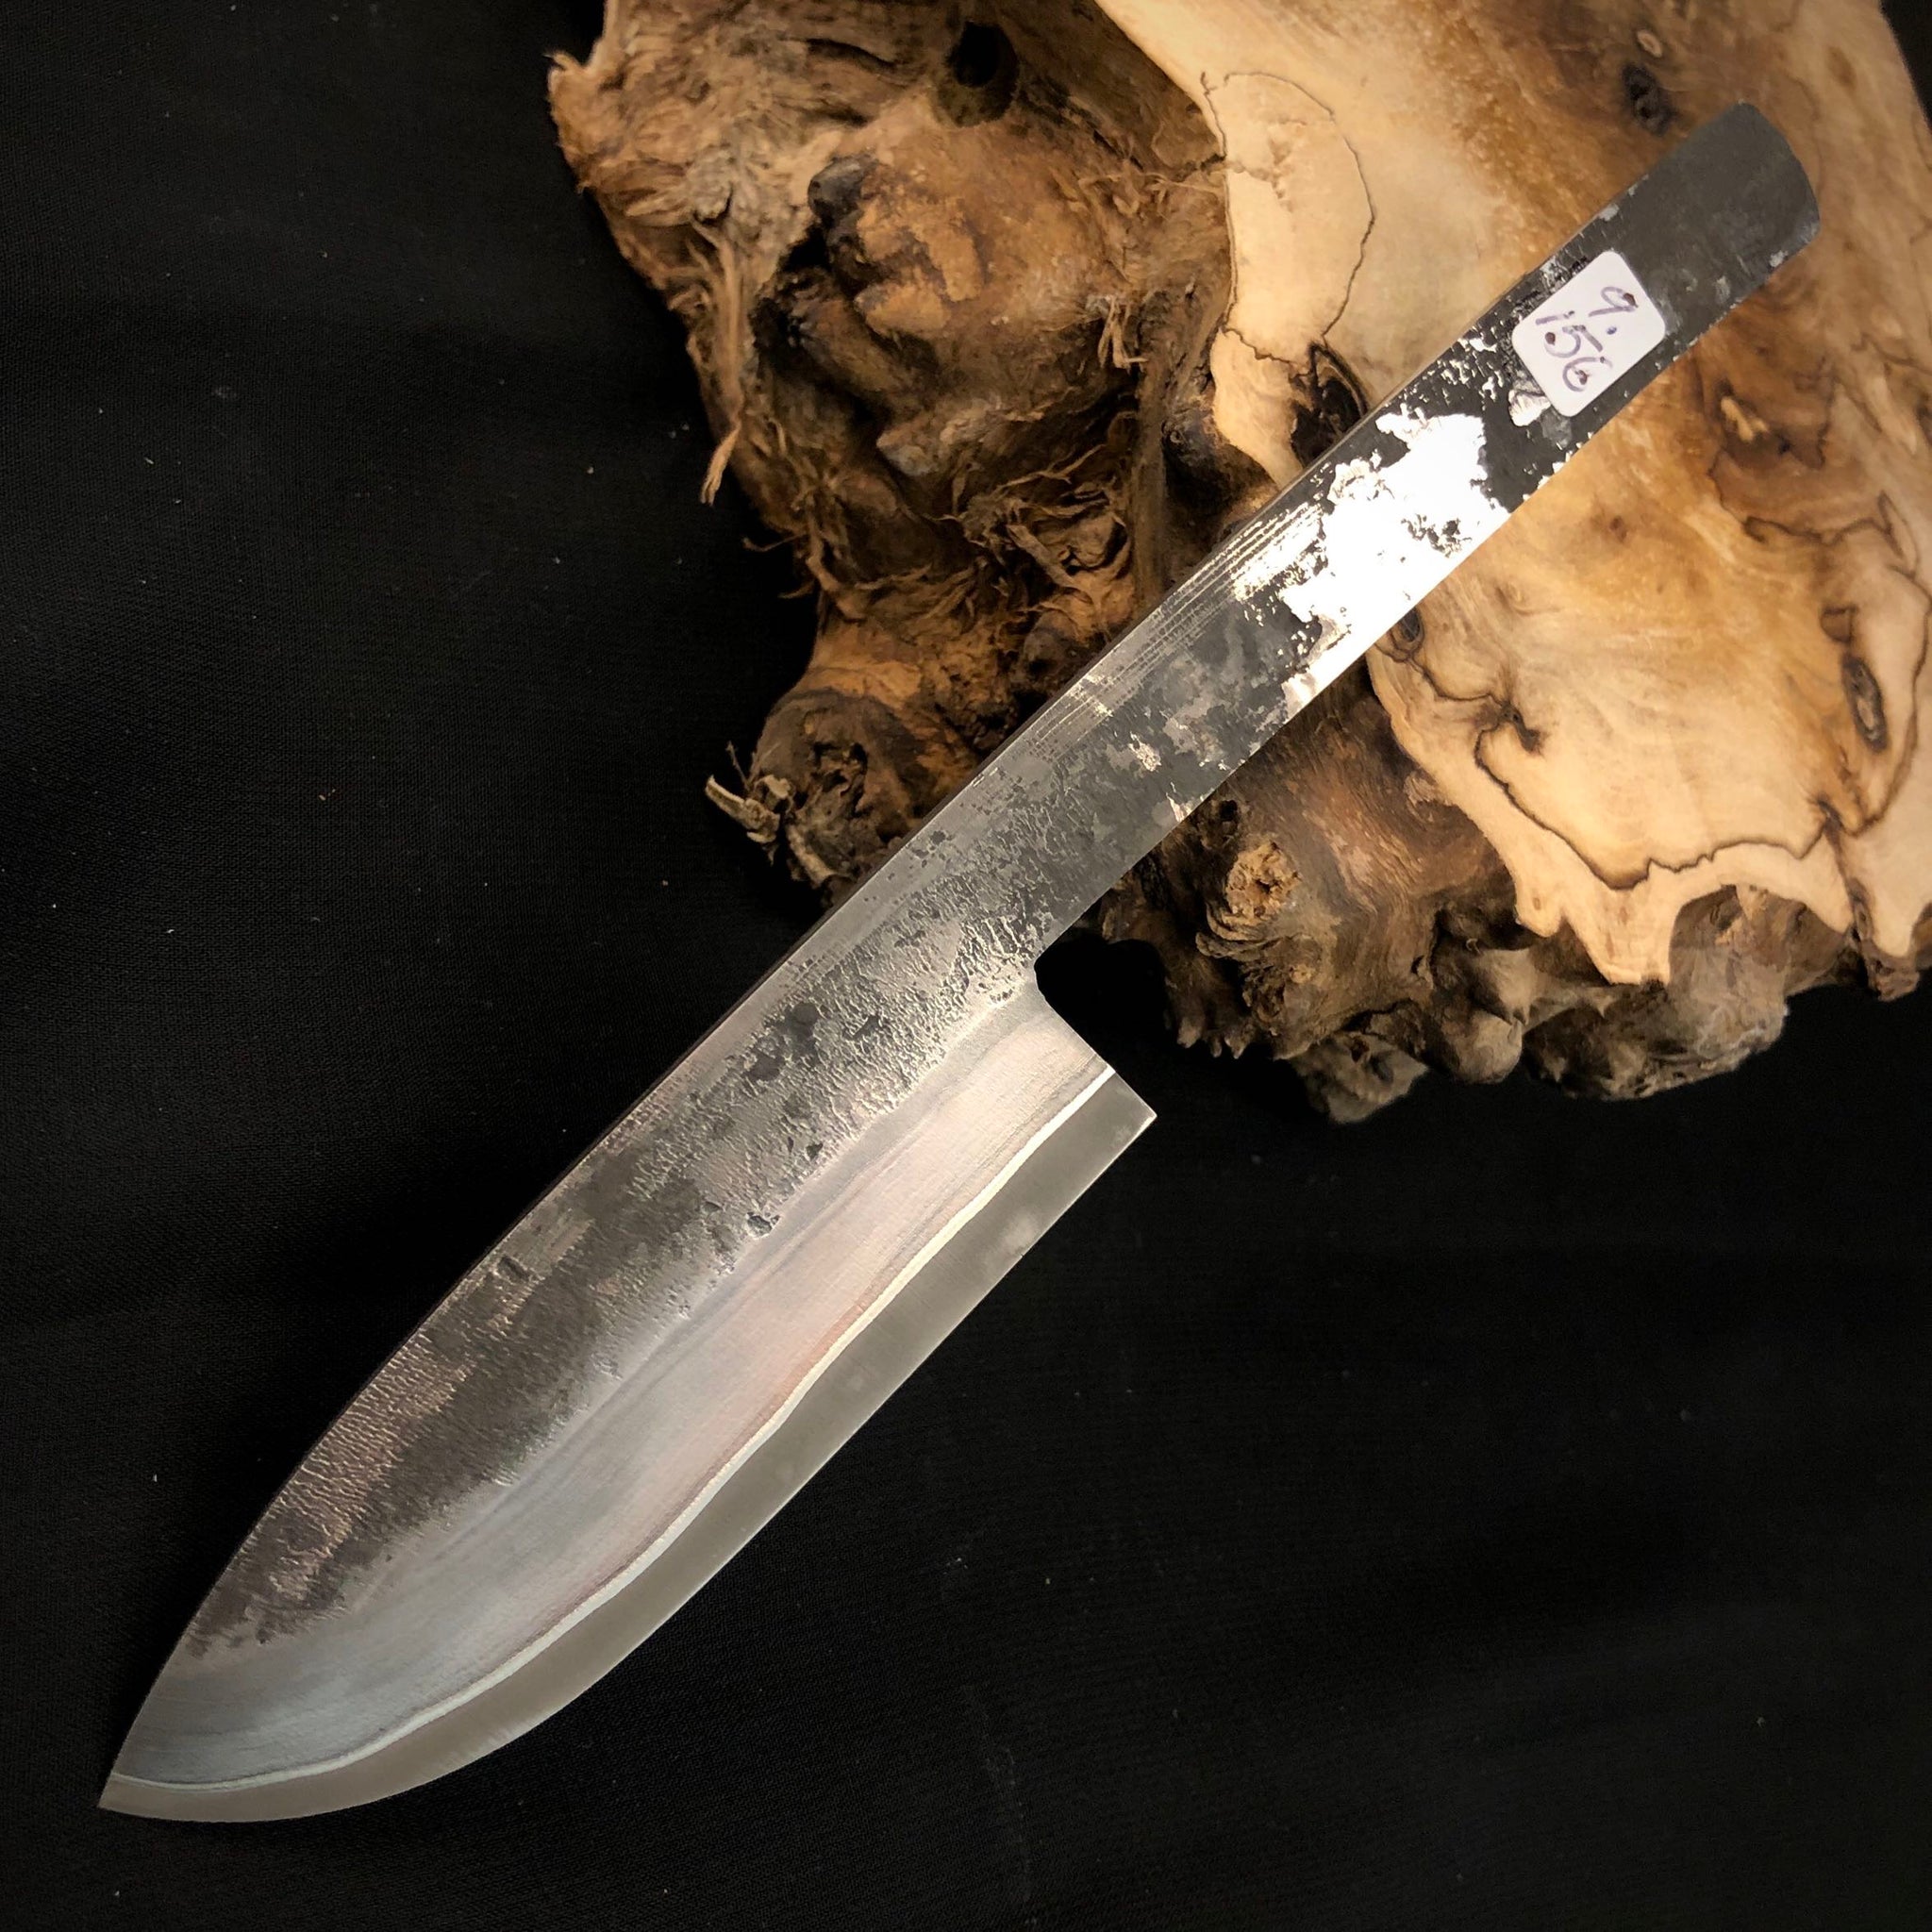 Adding handles to blanks - looking for opinions. : r/knifemaking